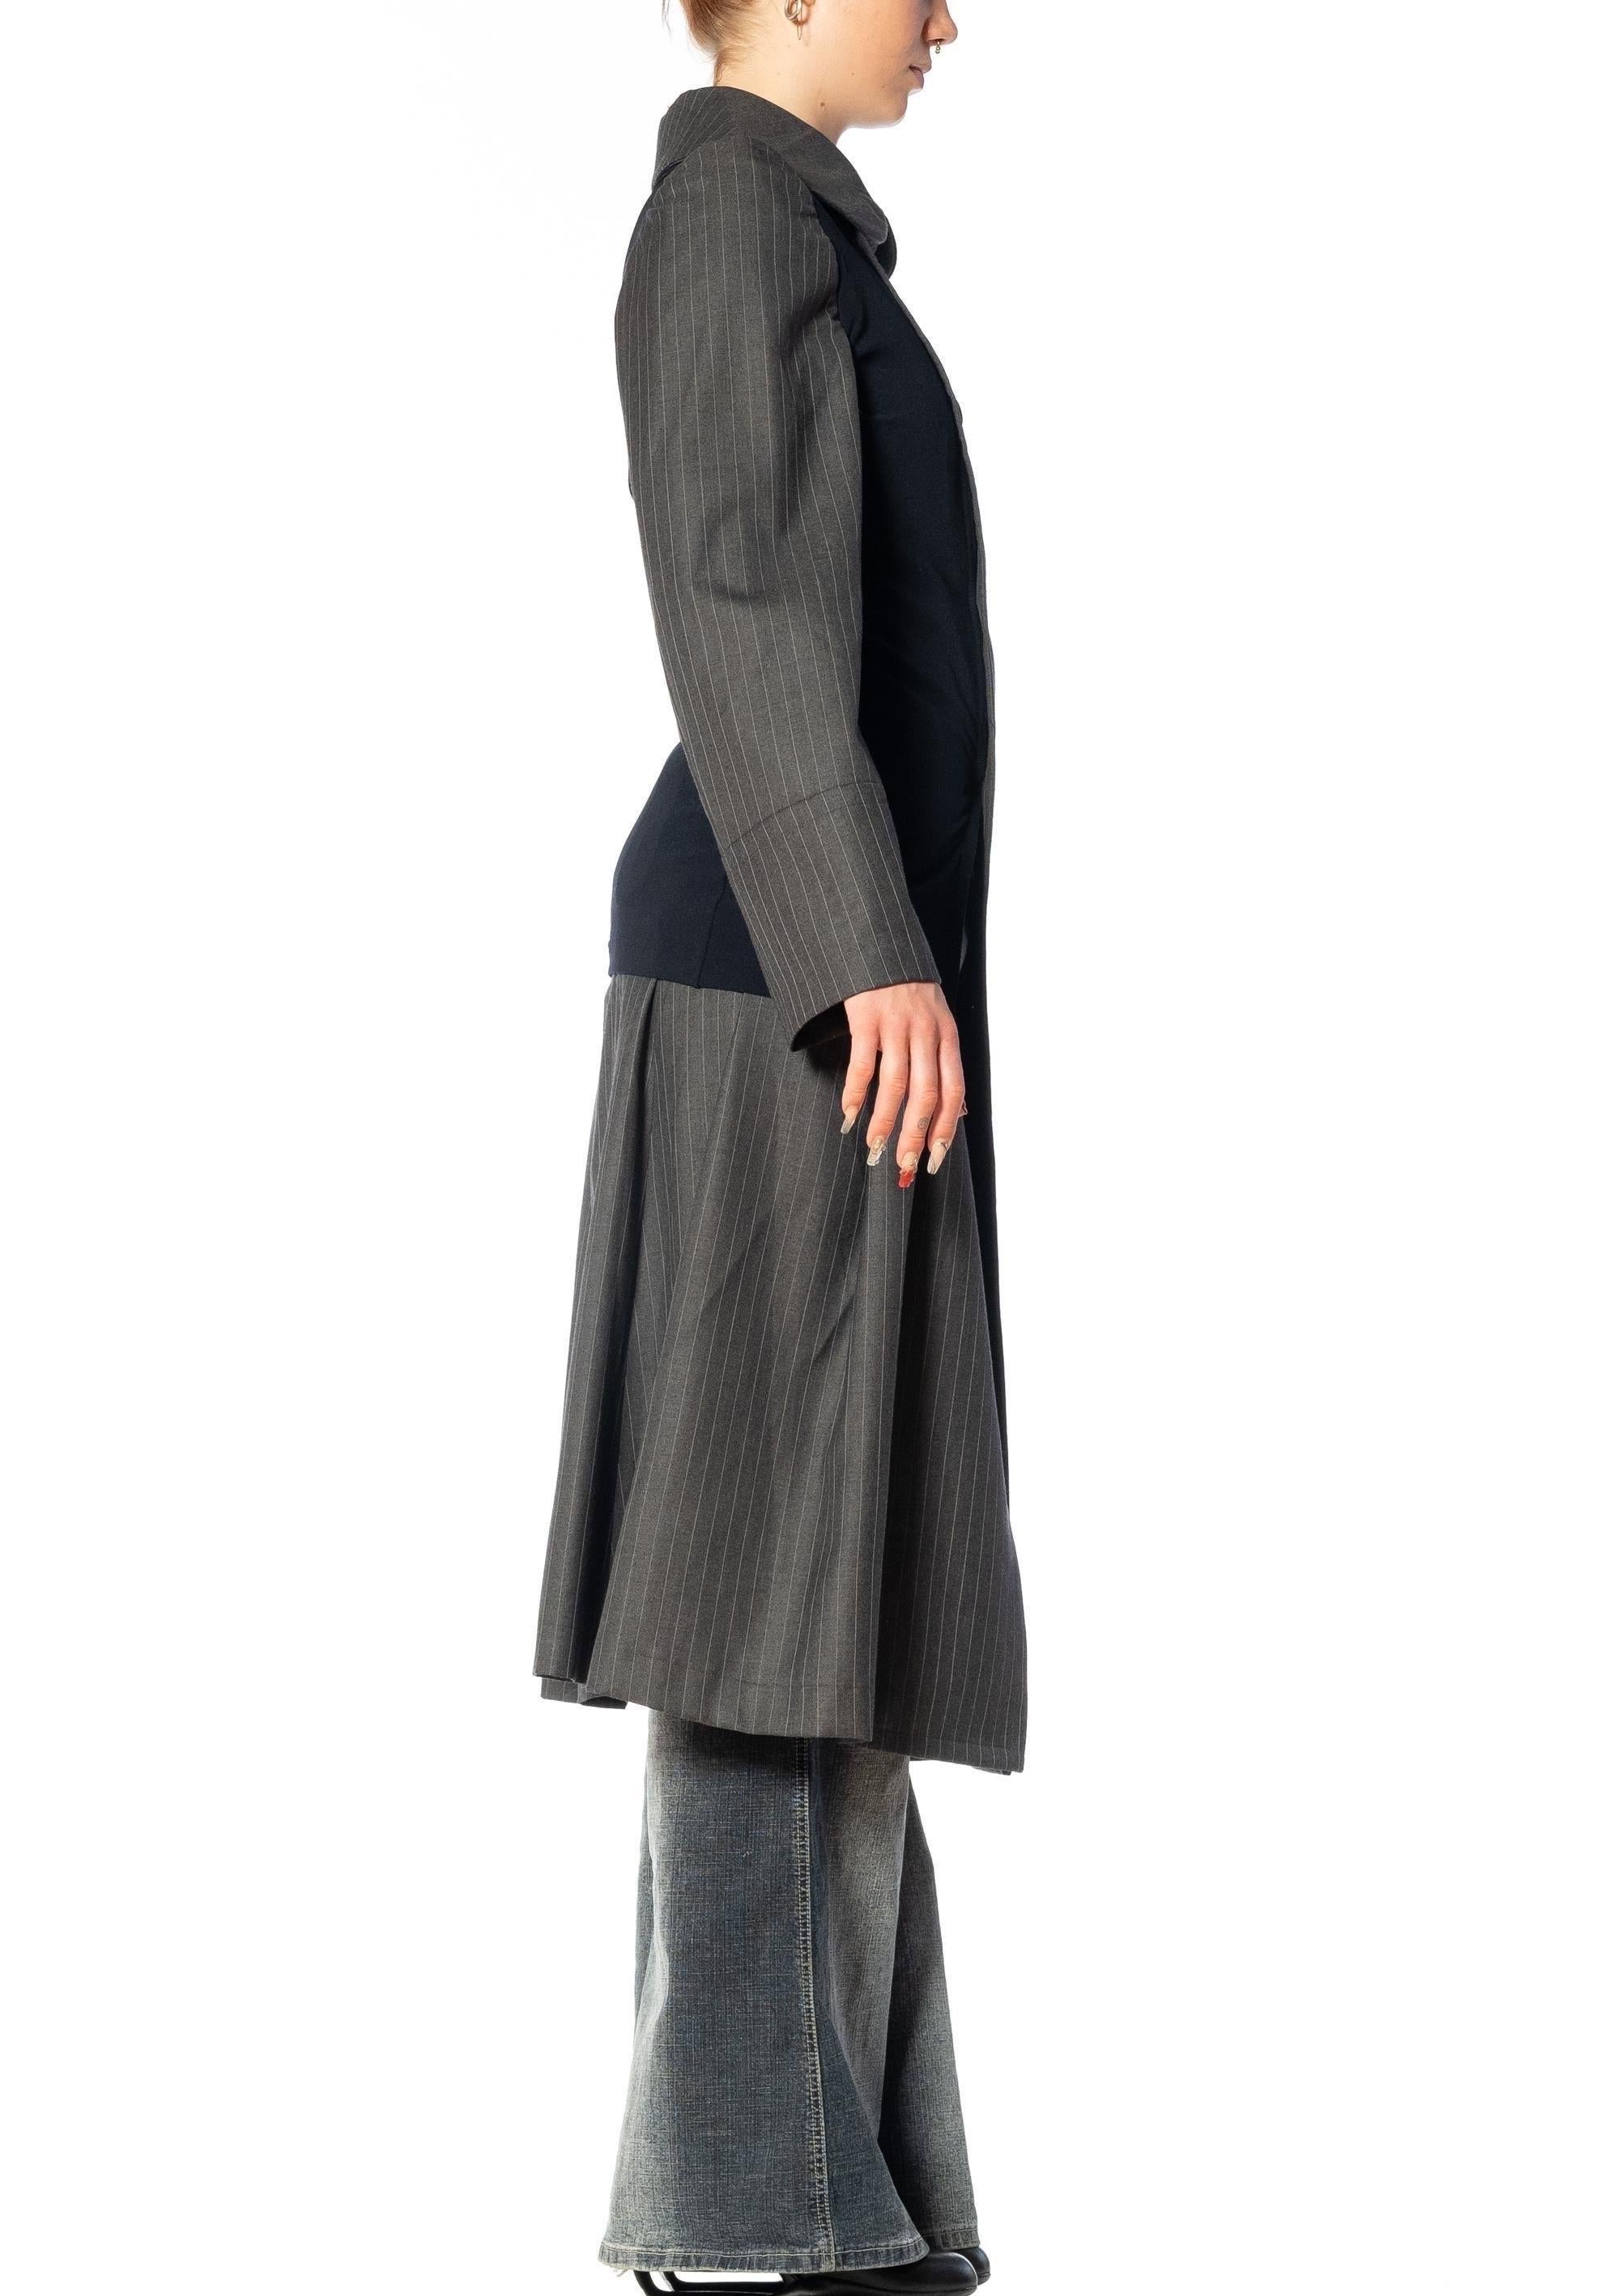 2000S COMME DES GARCONS Gray & Navy Wool Coat With Shrunken Poly Over-Layer 2007 For Sale 1